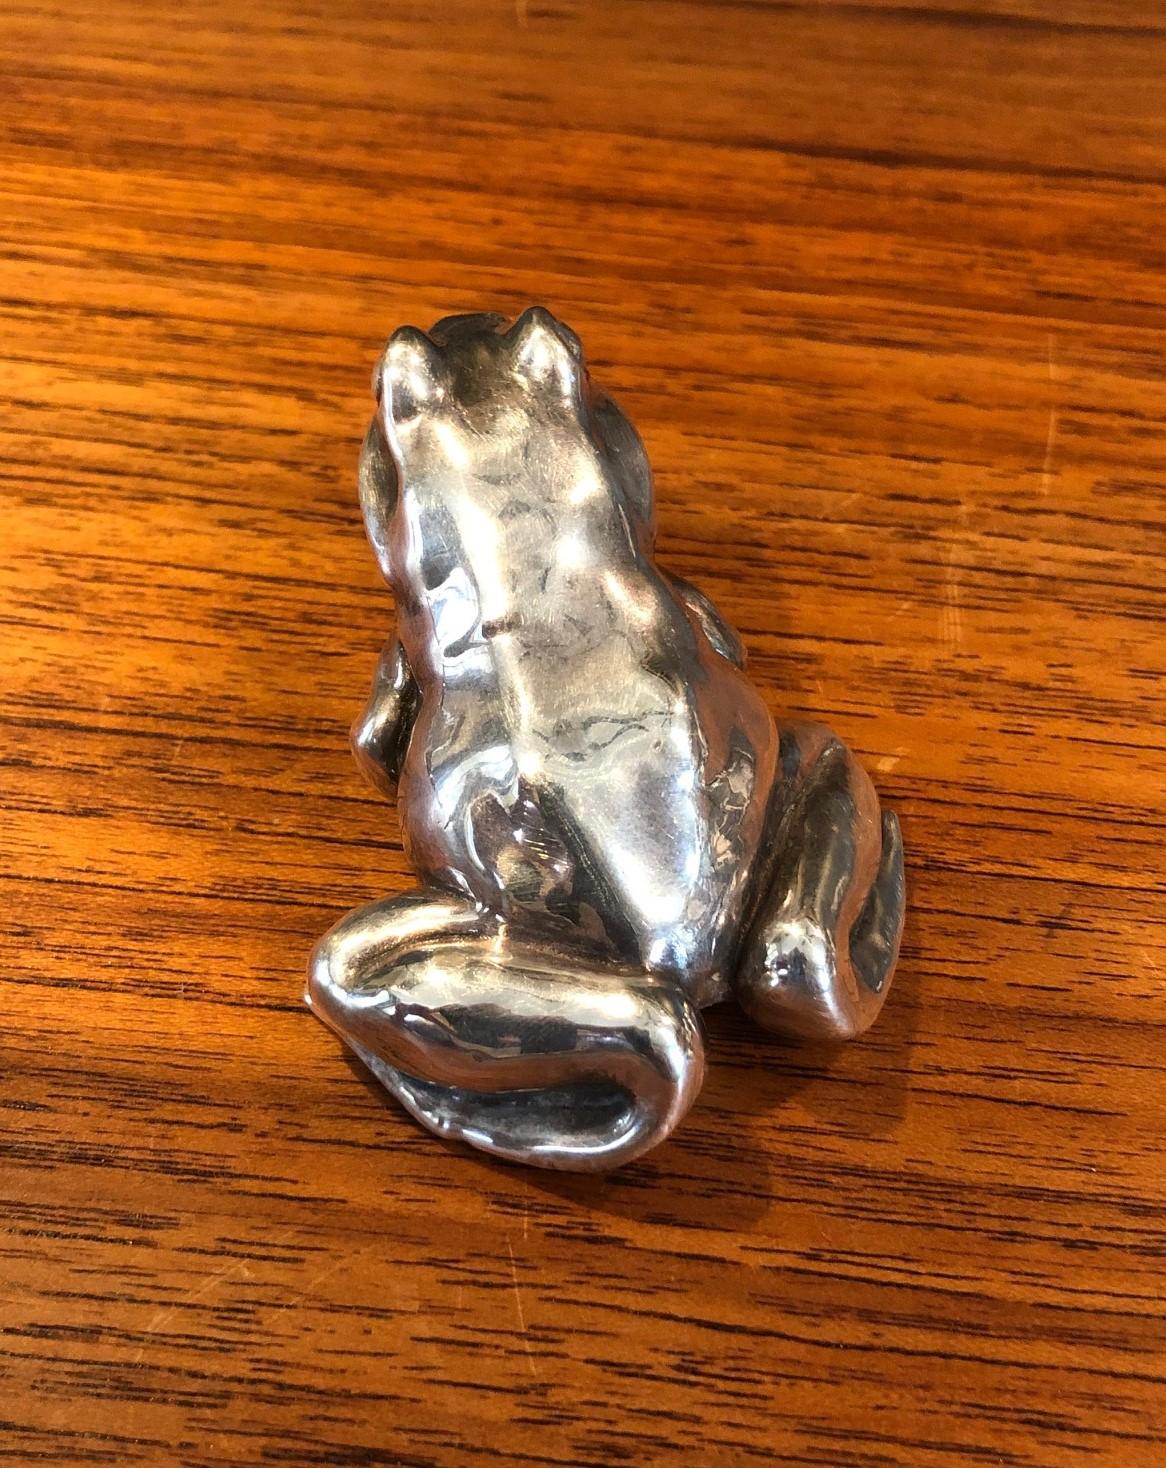 American Sterling Silver Frog / Toad Sculpture